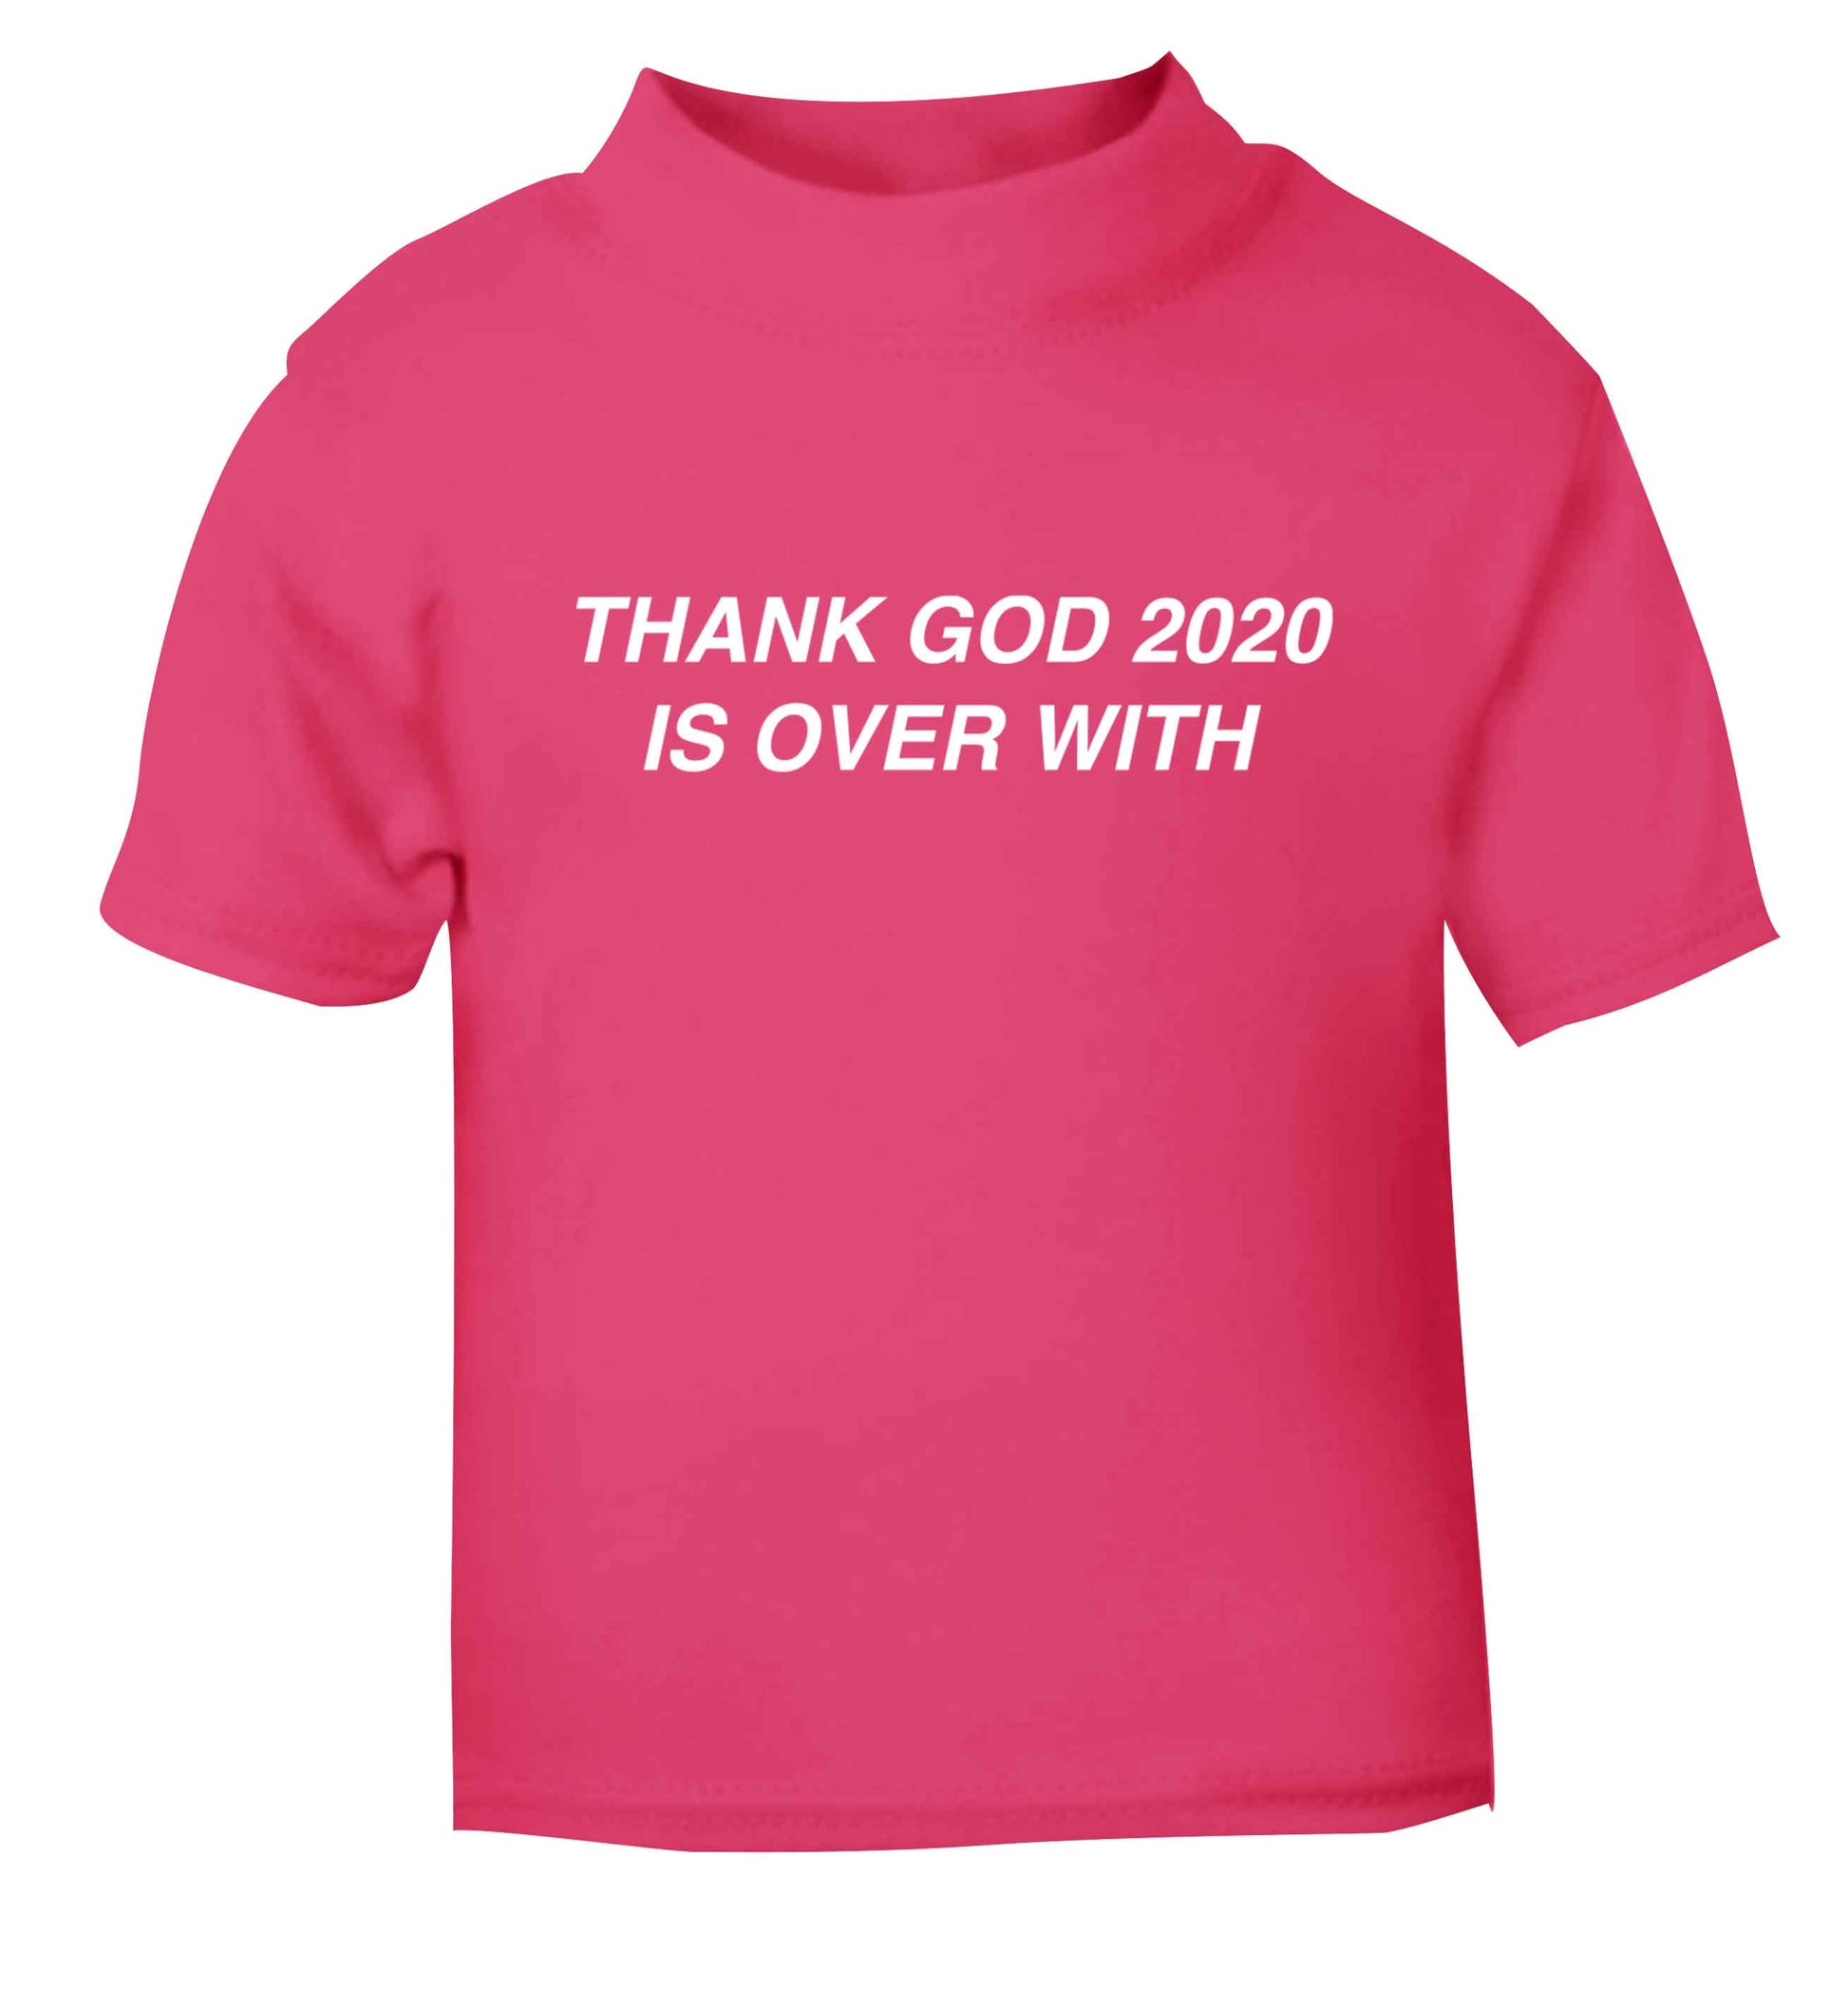 Thank god 2020 is over with pink baby toddler Tshirt 2 Years